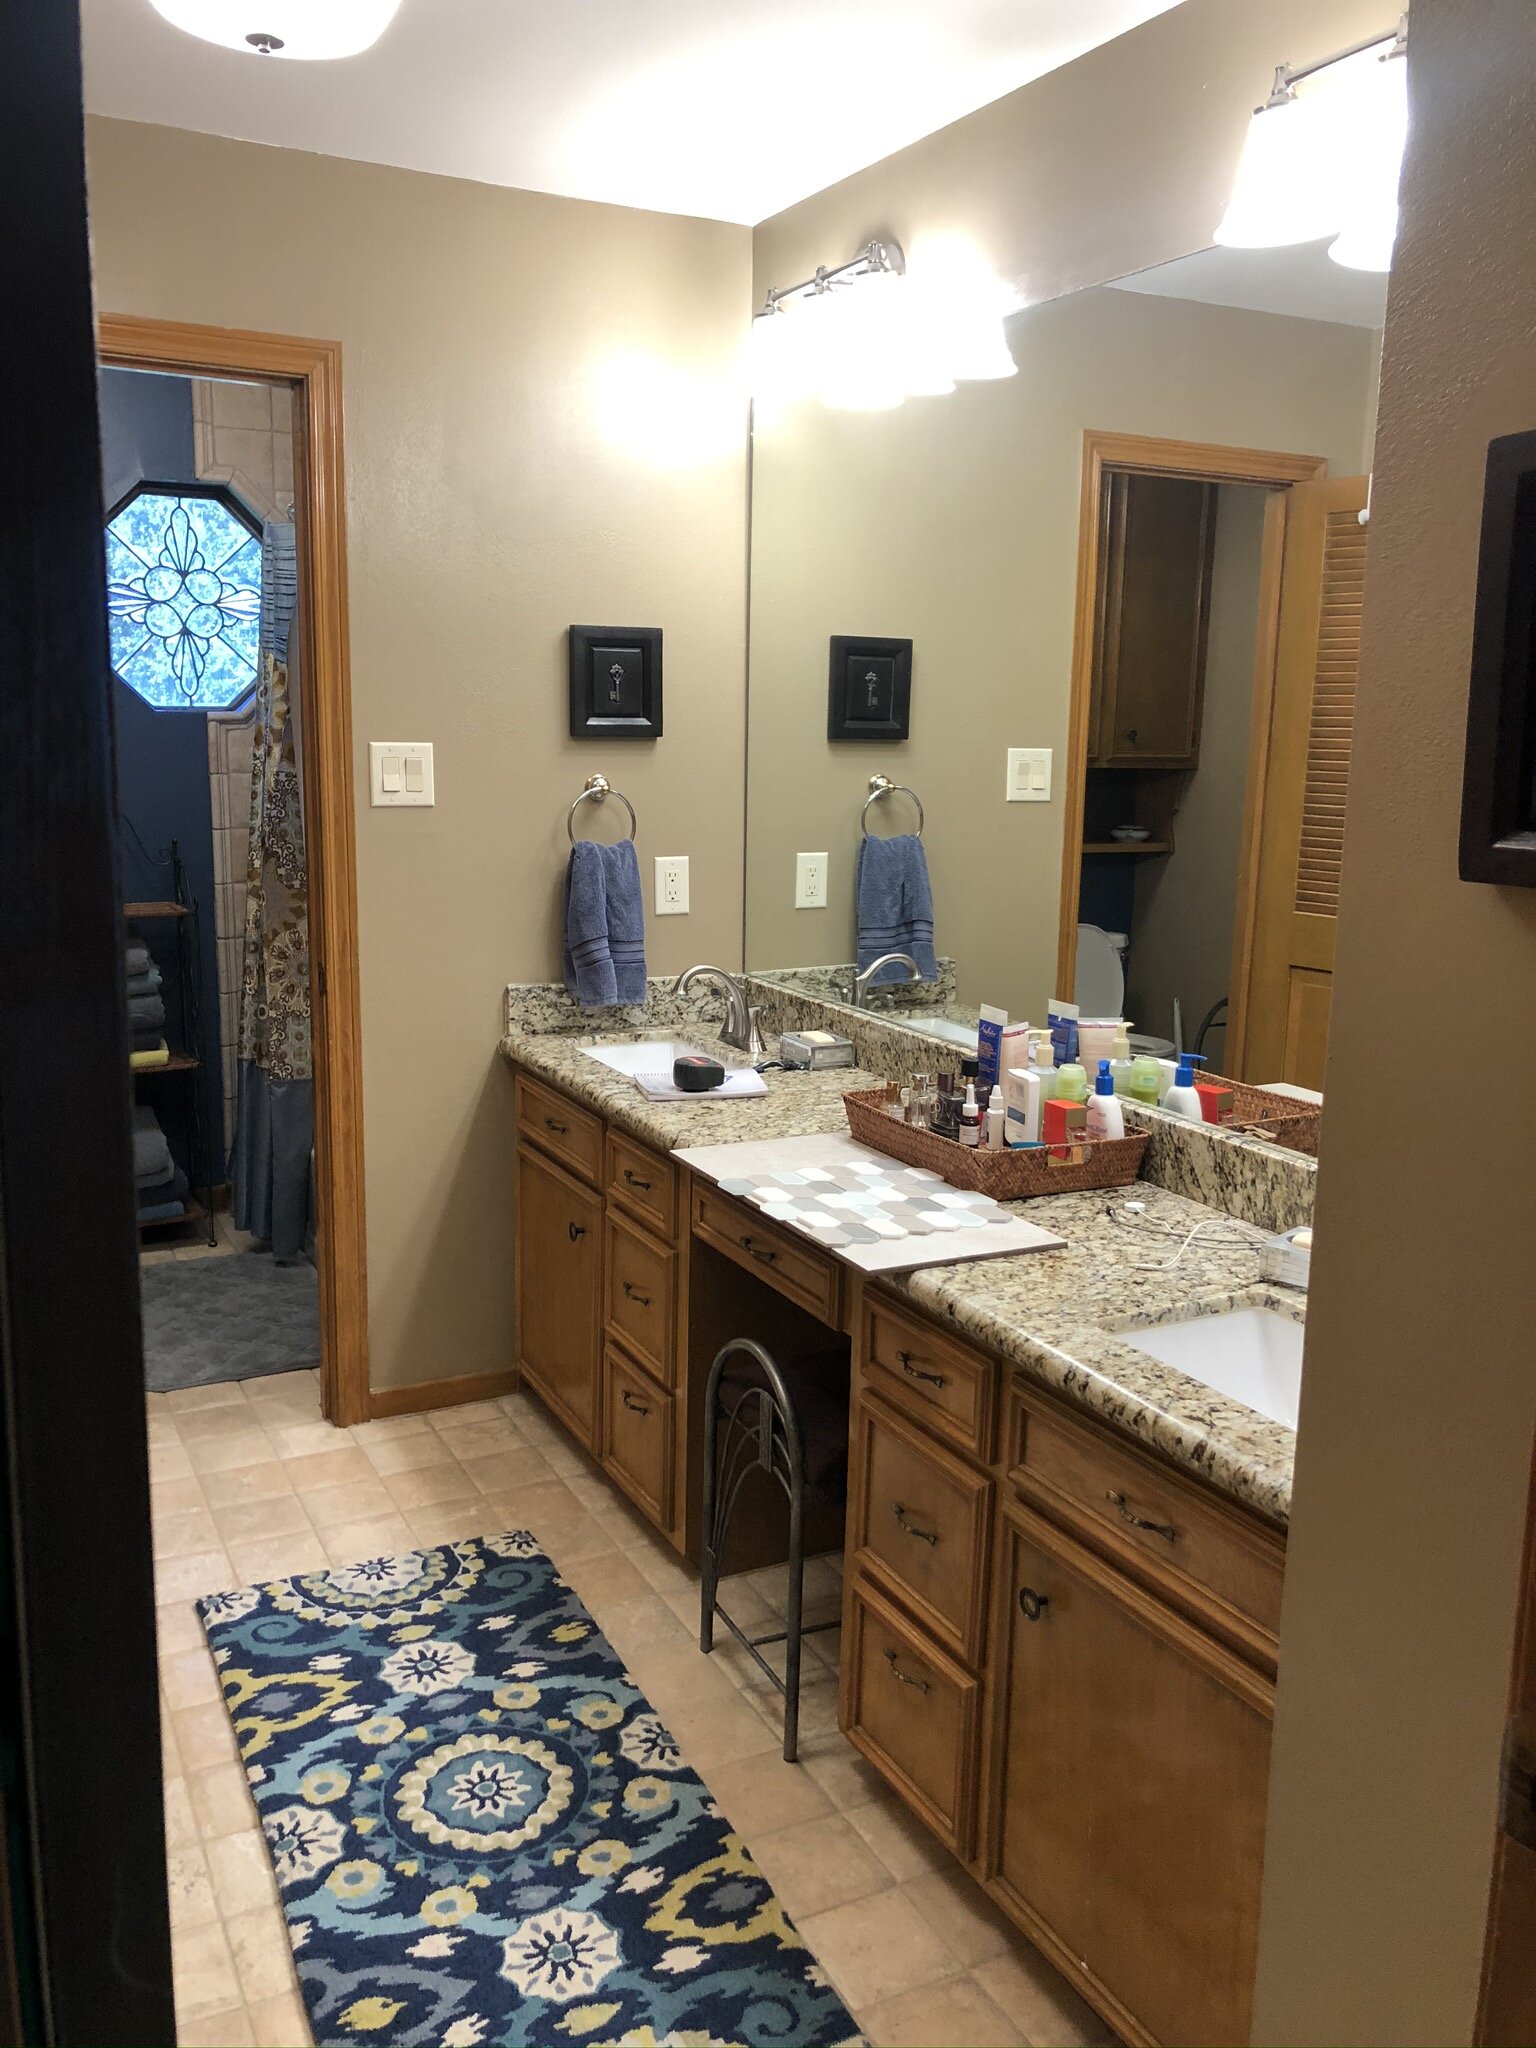 Gallery Images : Positive Cleaning Services, LLC.